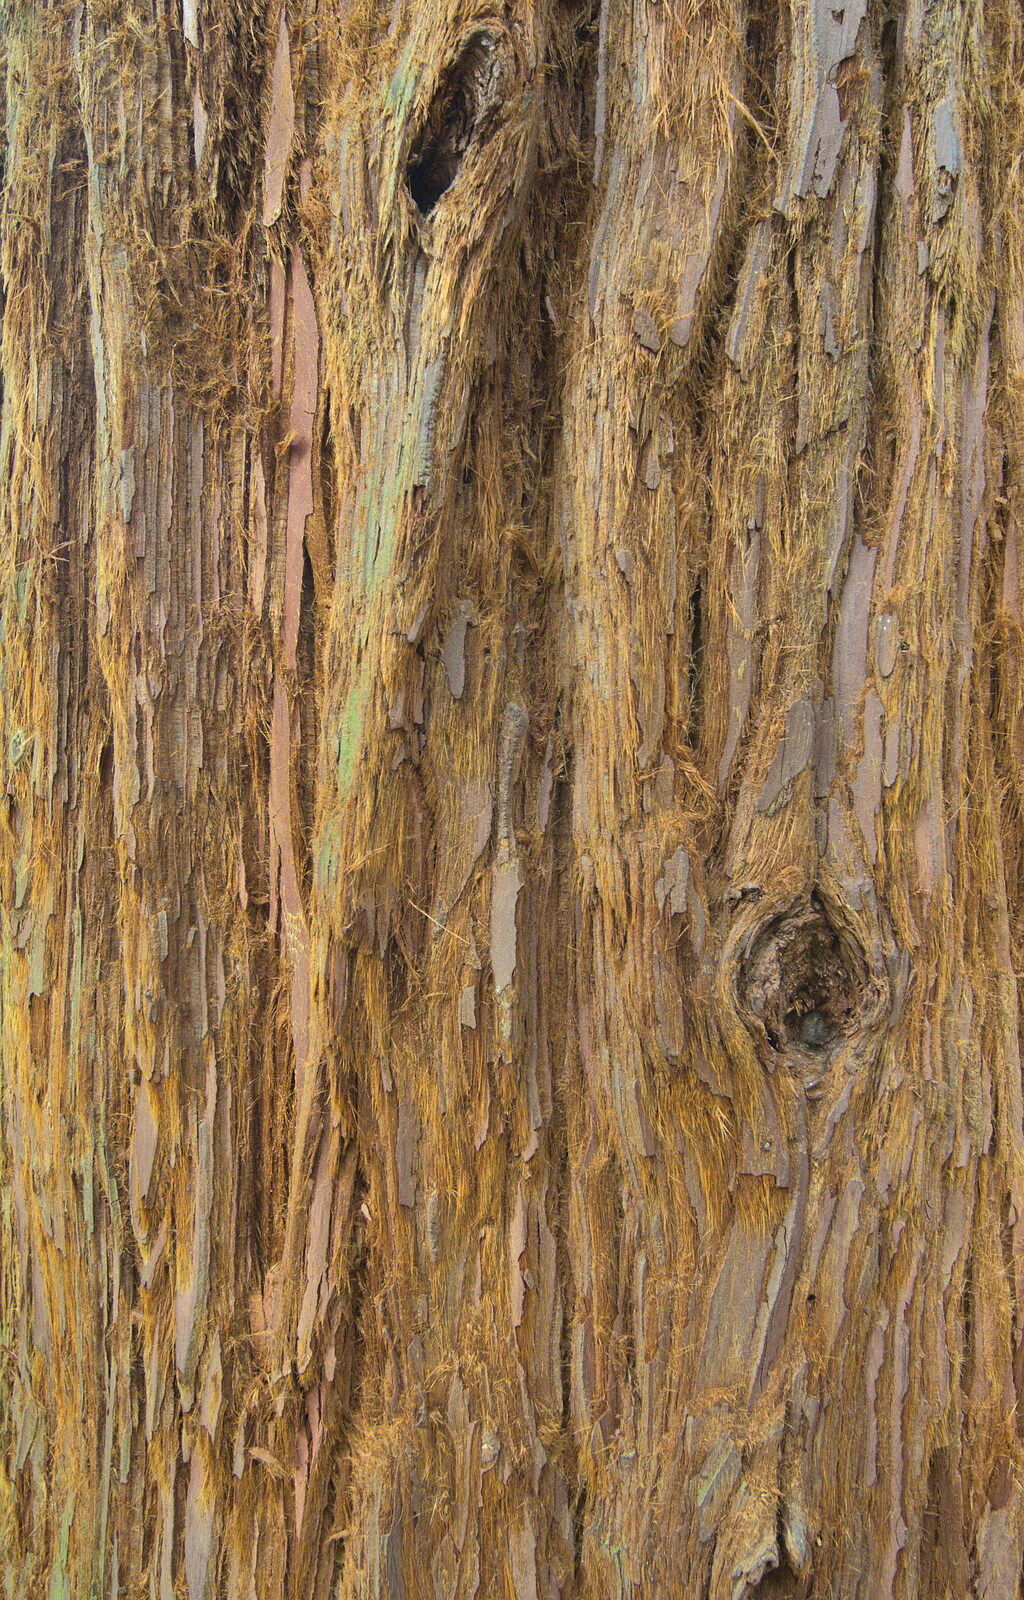 Redwood's hairy bark from The Ornamental Drive, Rhinefield, New Forest - 20th March 2013